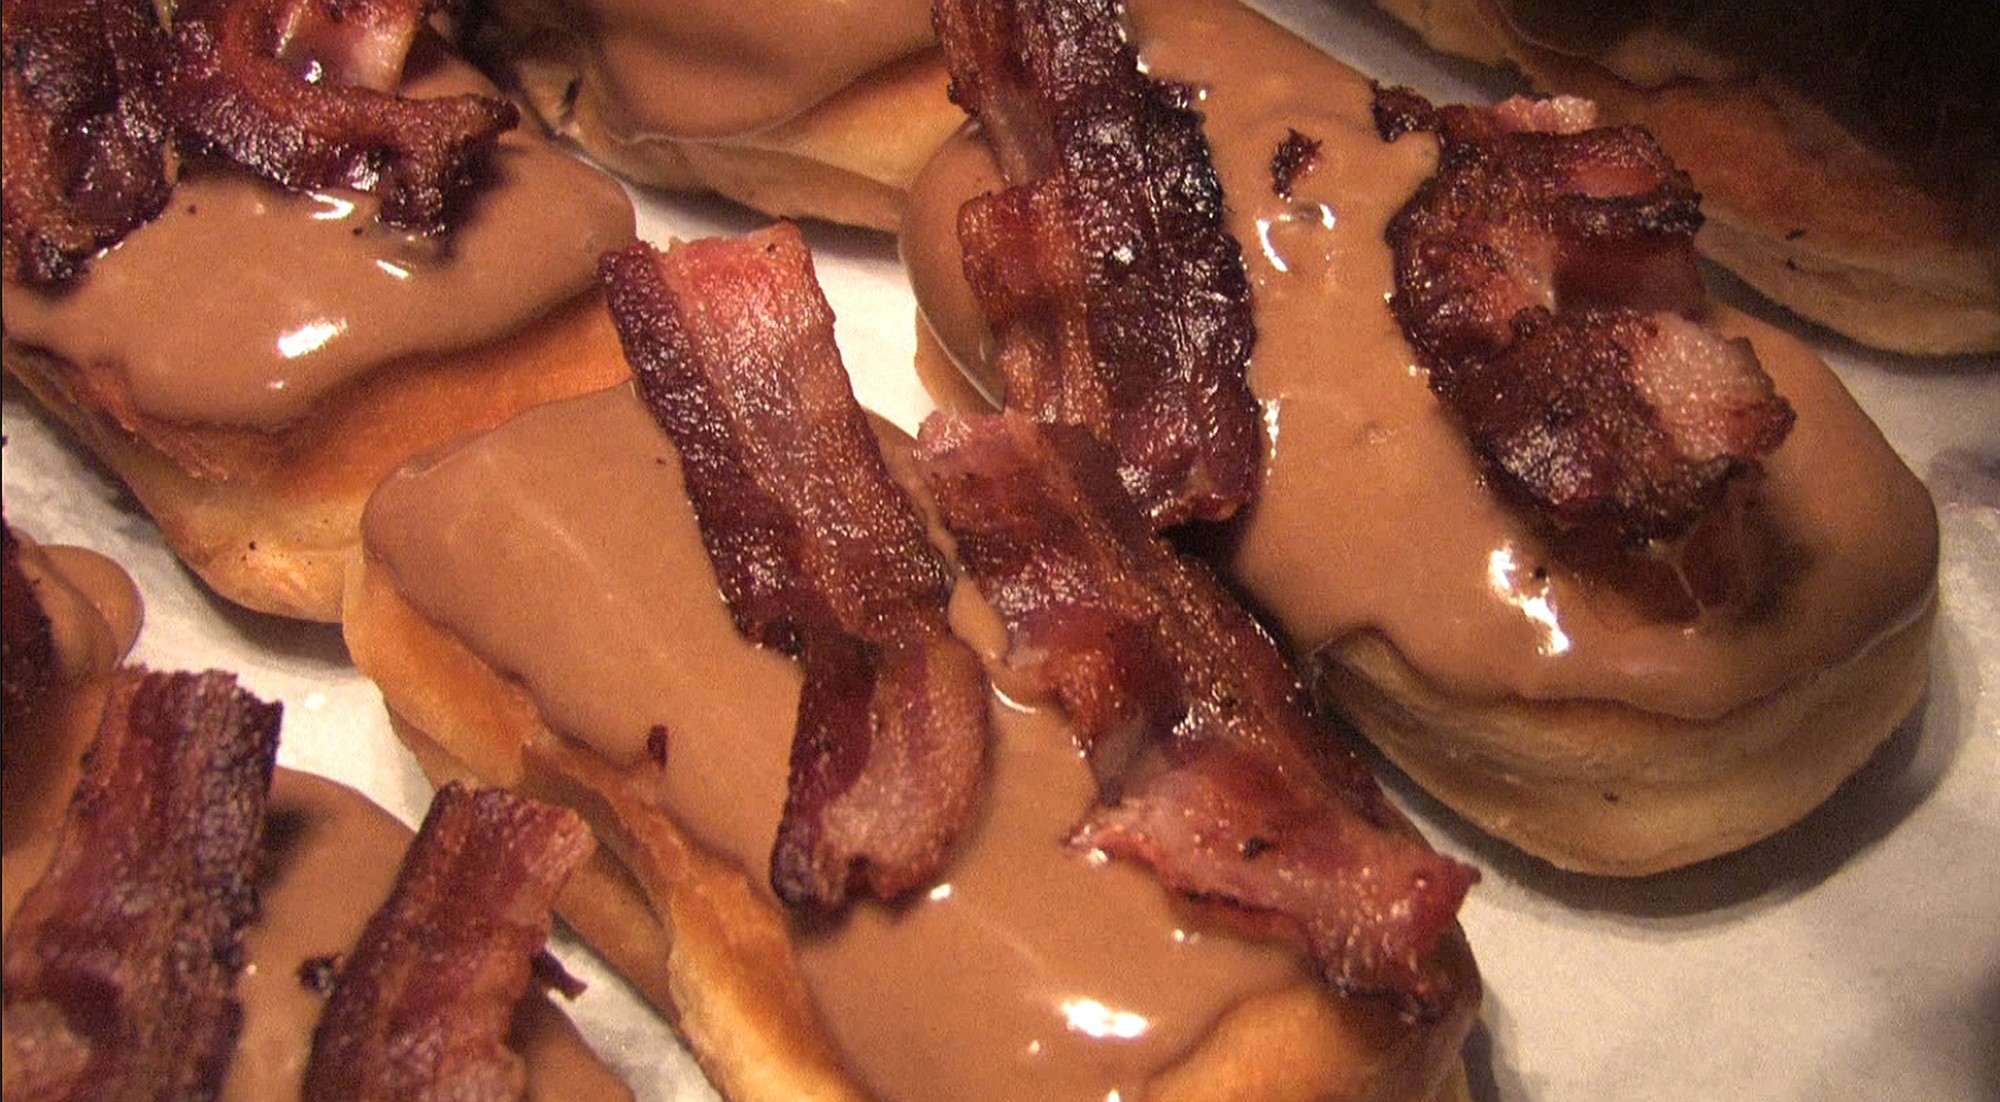 Rick Bowmer/Associated Press files
Bacon Maple Bars are shown at Voodoo Doughnut in Portland. The Portland doughnut chain has opened a fifth shop in Austin, Texas.